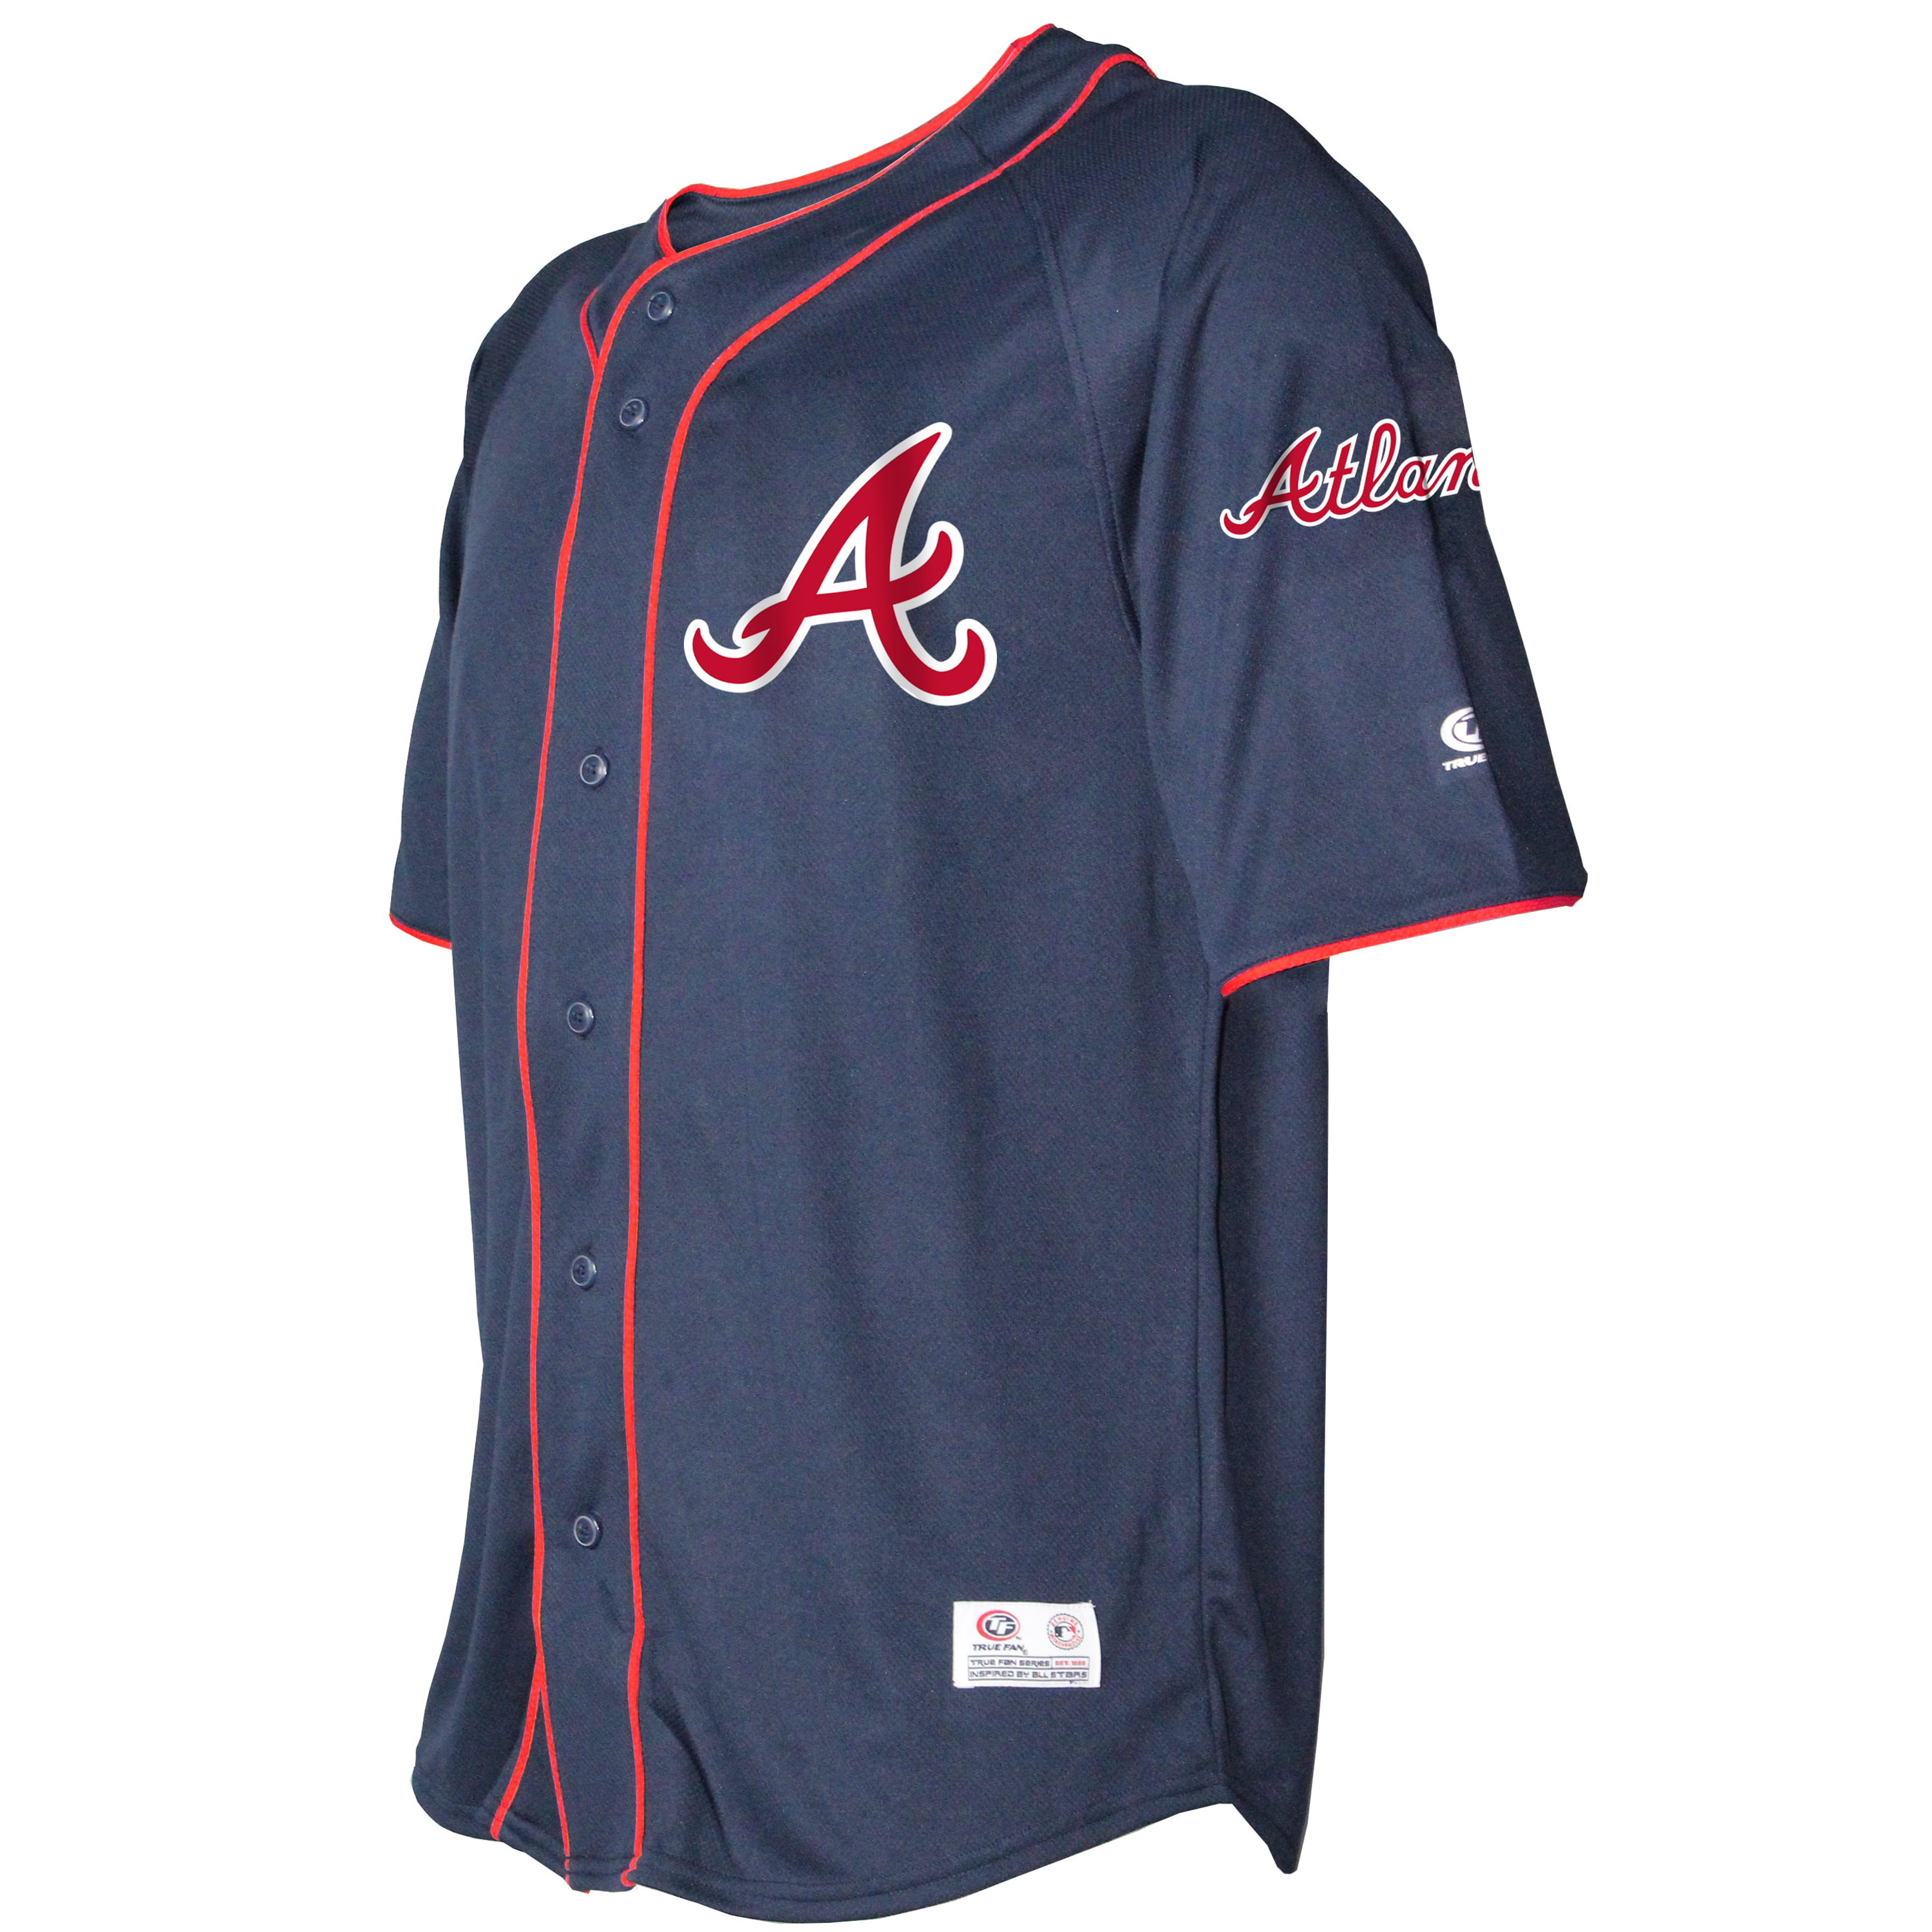 Dale Murphy Atlanta Braves Autographed Mitchell and Ness Powder